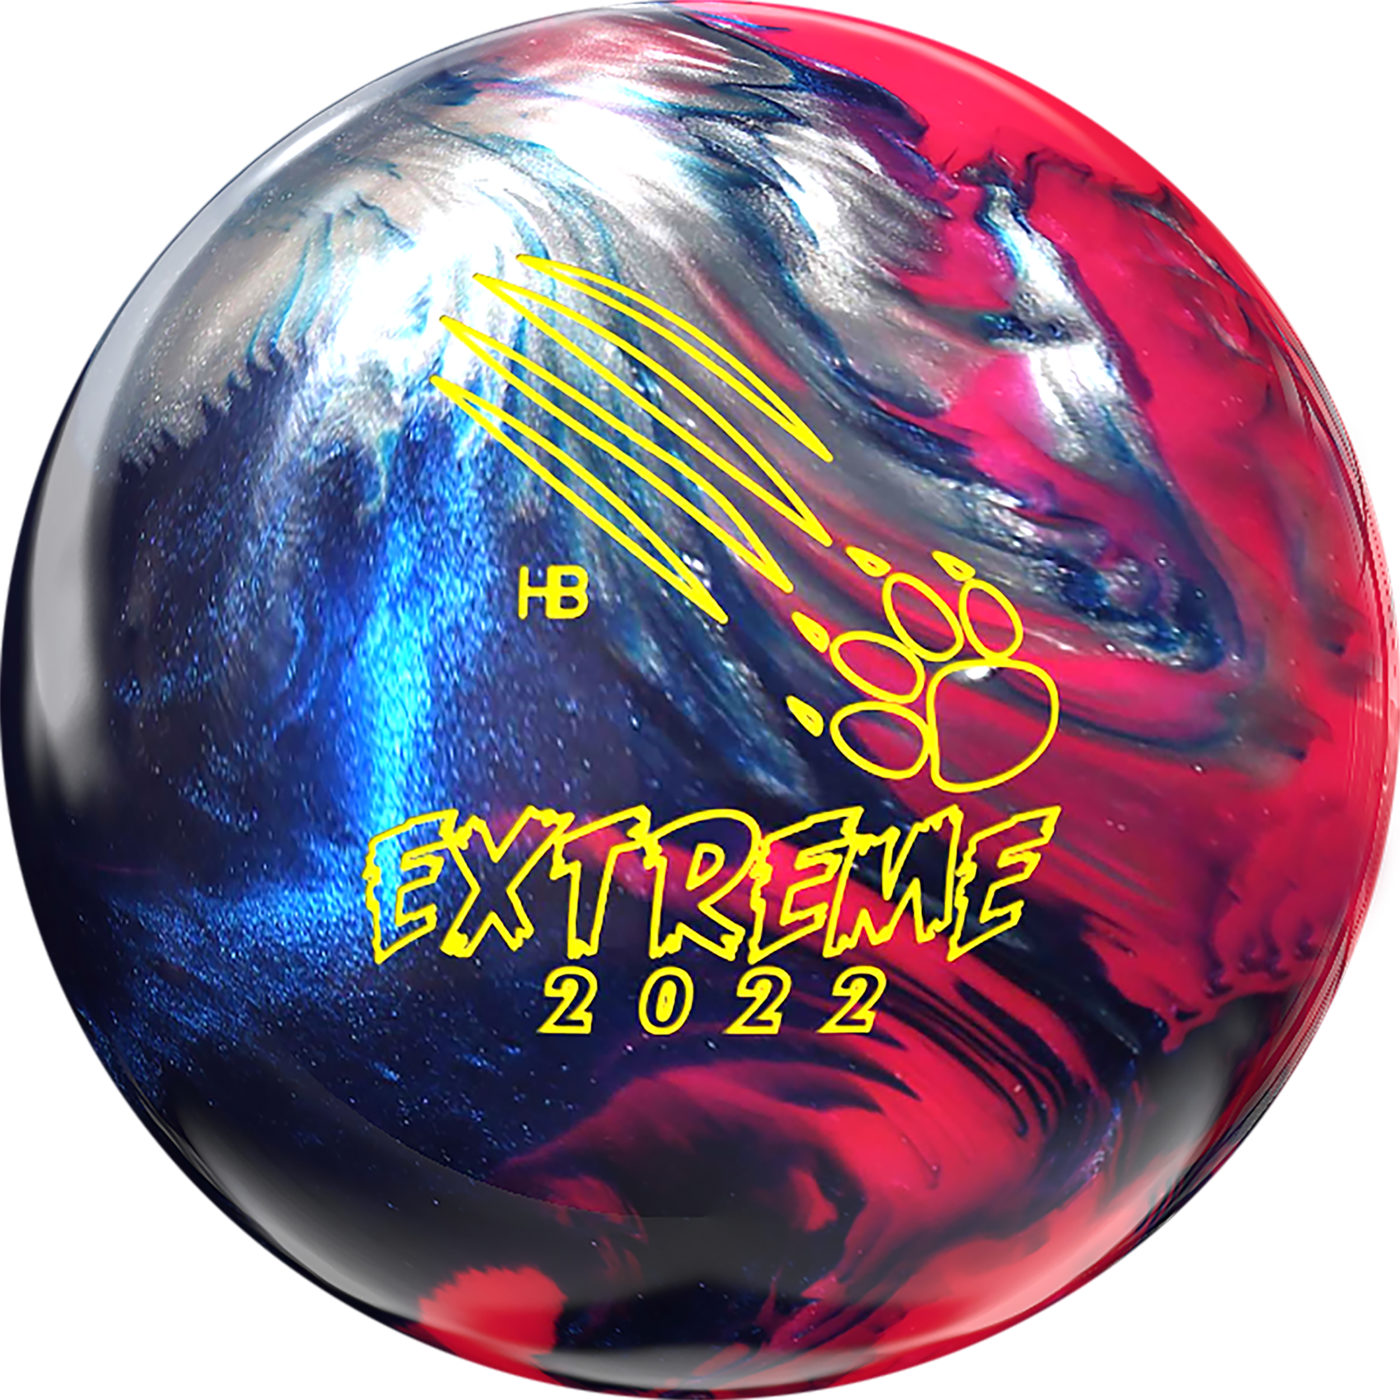 900 Global Honey Badger Extreme 2022 Overseas Bowling Ball Questions & Answers